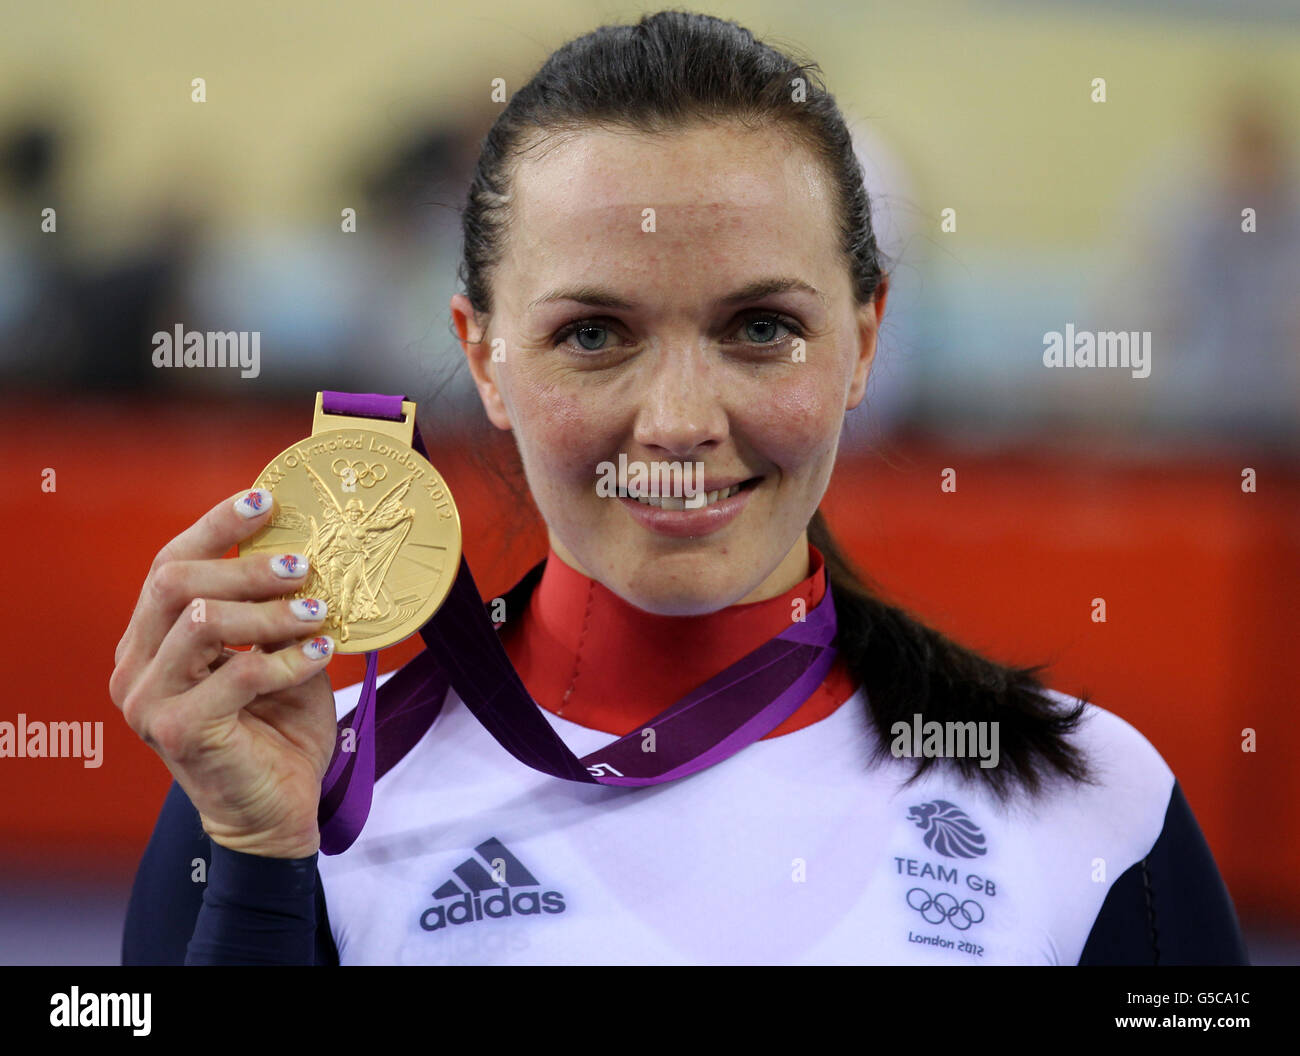 Great Britain's Victoria Pendleton celebrates with her Gold medal after winning the Women's Keirin Final at the Velodrome in the Olympic Park, during day seven of the London 2012 Olympics. Stock Photo